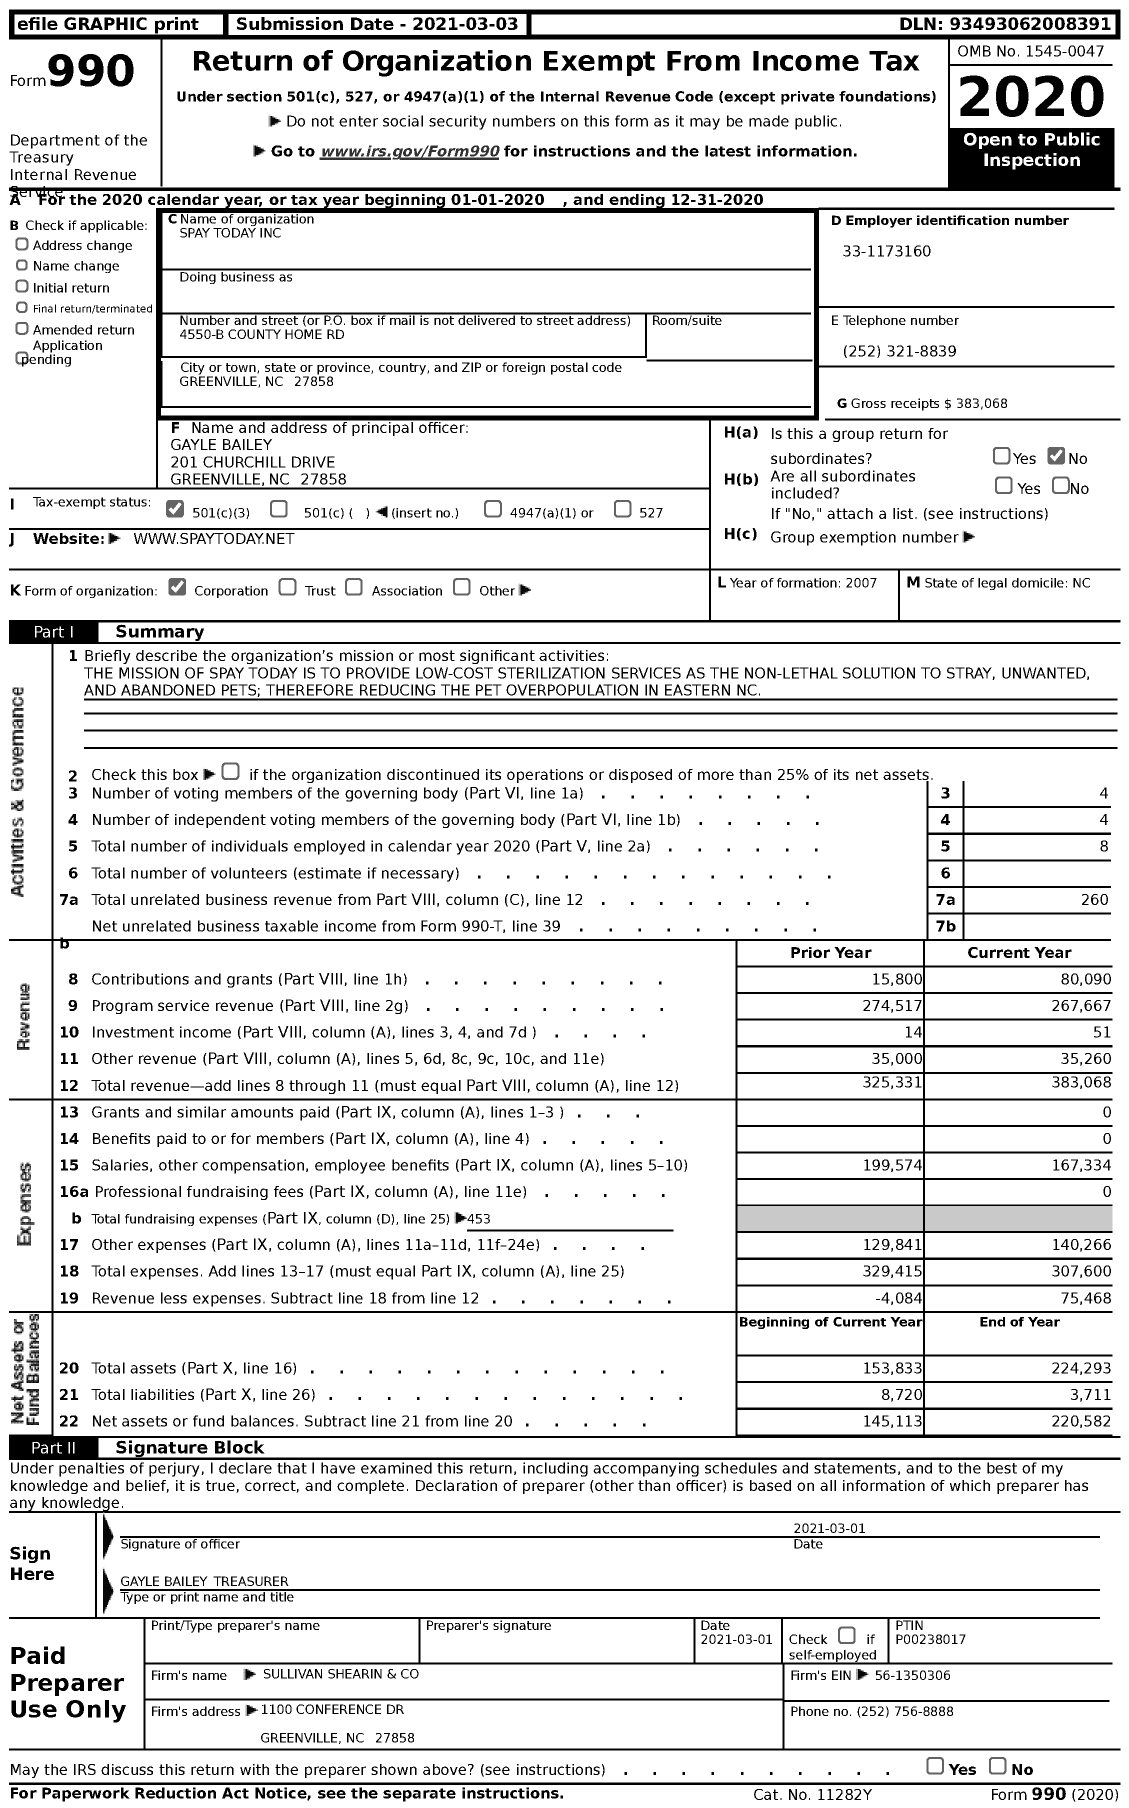 Image of first page of 2020 Form 990 for Spay Today